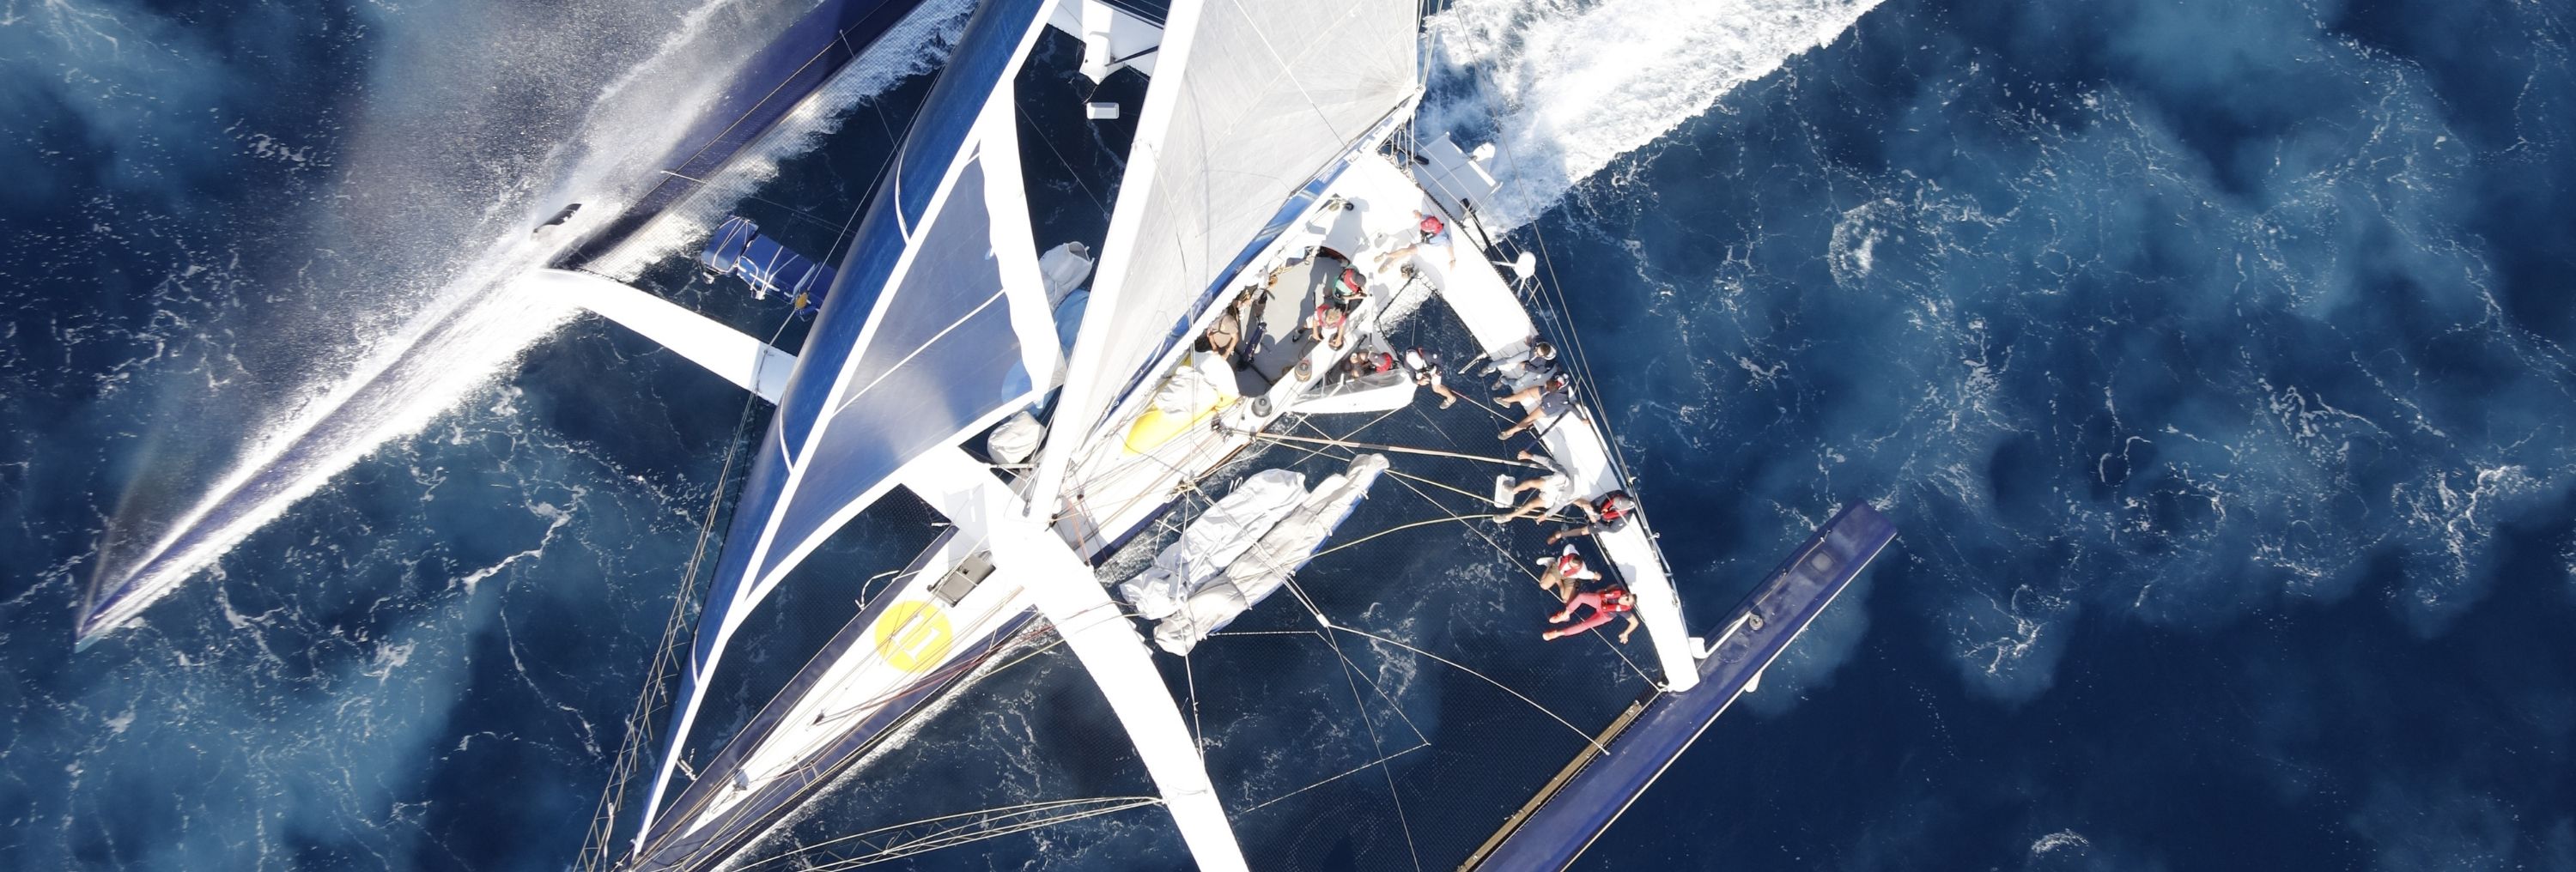 ULTIM EMOTION 2:  participates in the 2022 RORC Carribean 600